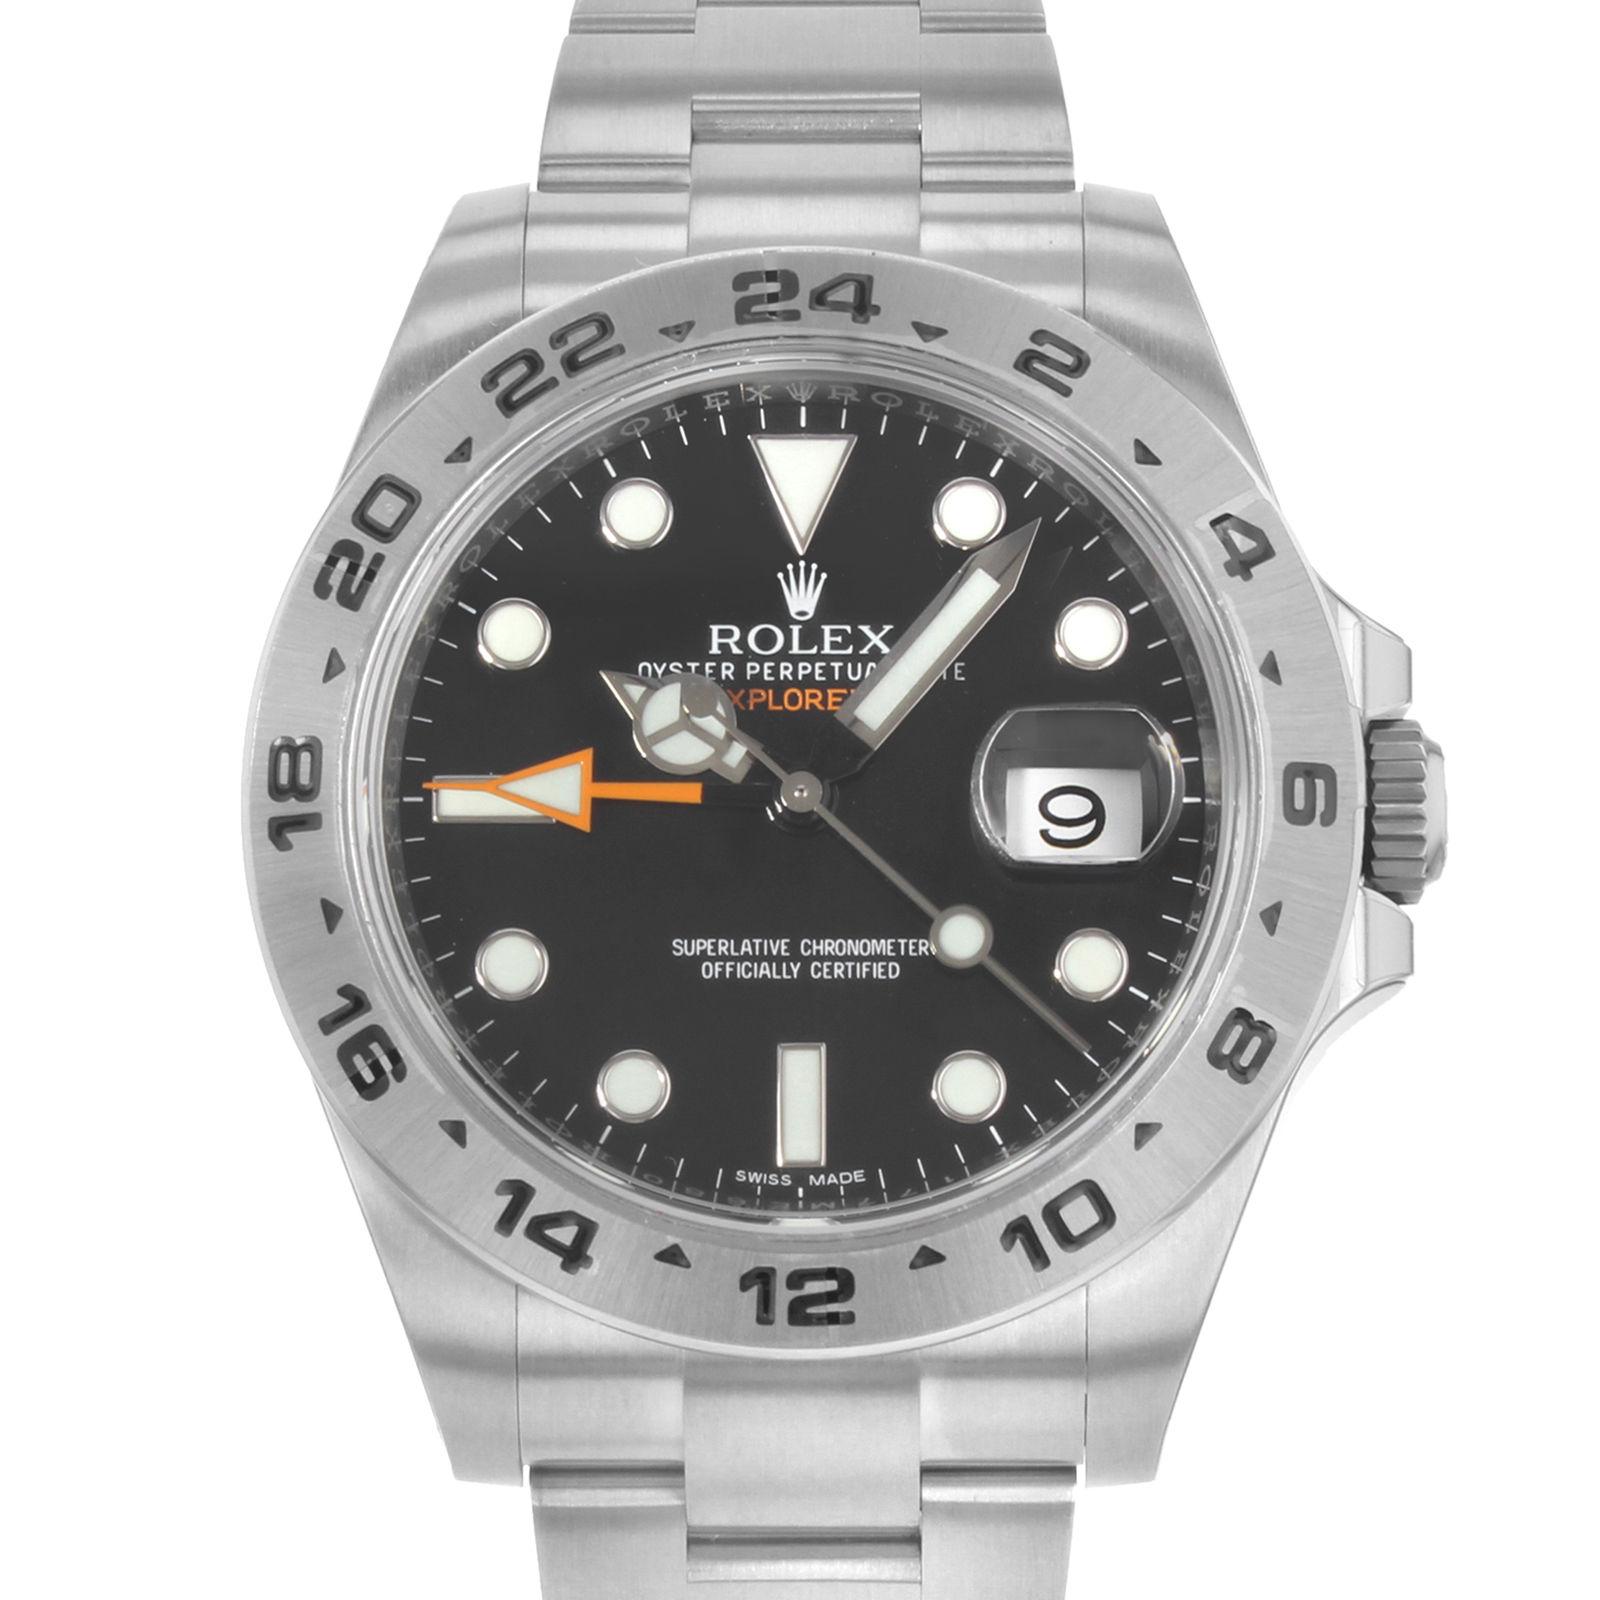 (17930)
This display model Rolex Explorer II 216570 is a beautiful men's timepiece that is powered by an automatic movement which is cased in a stainless steel case. It has a round shape face, date, dual time dial and has hand sticks & dots style